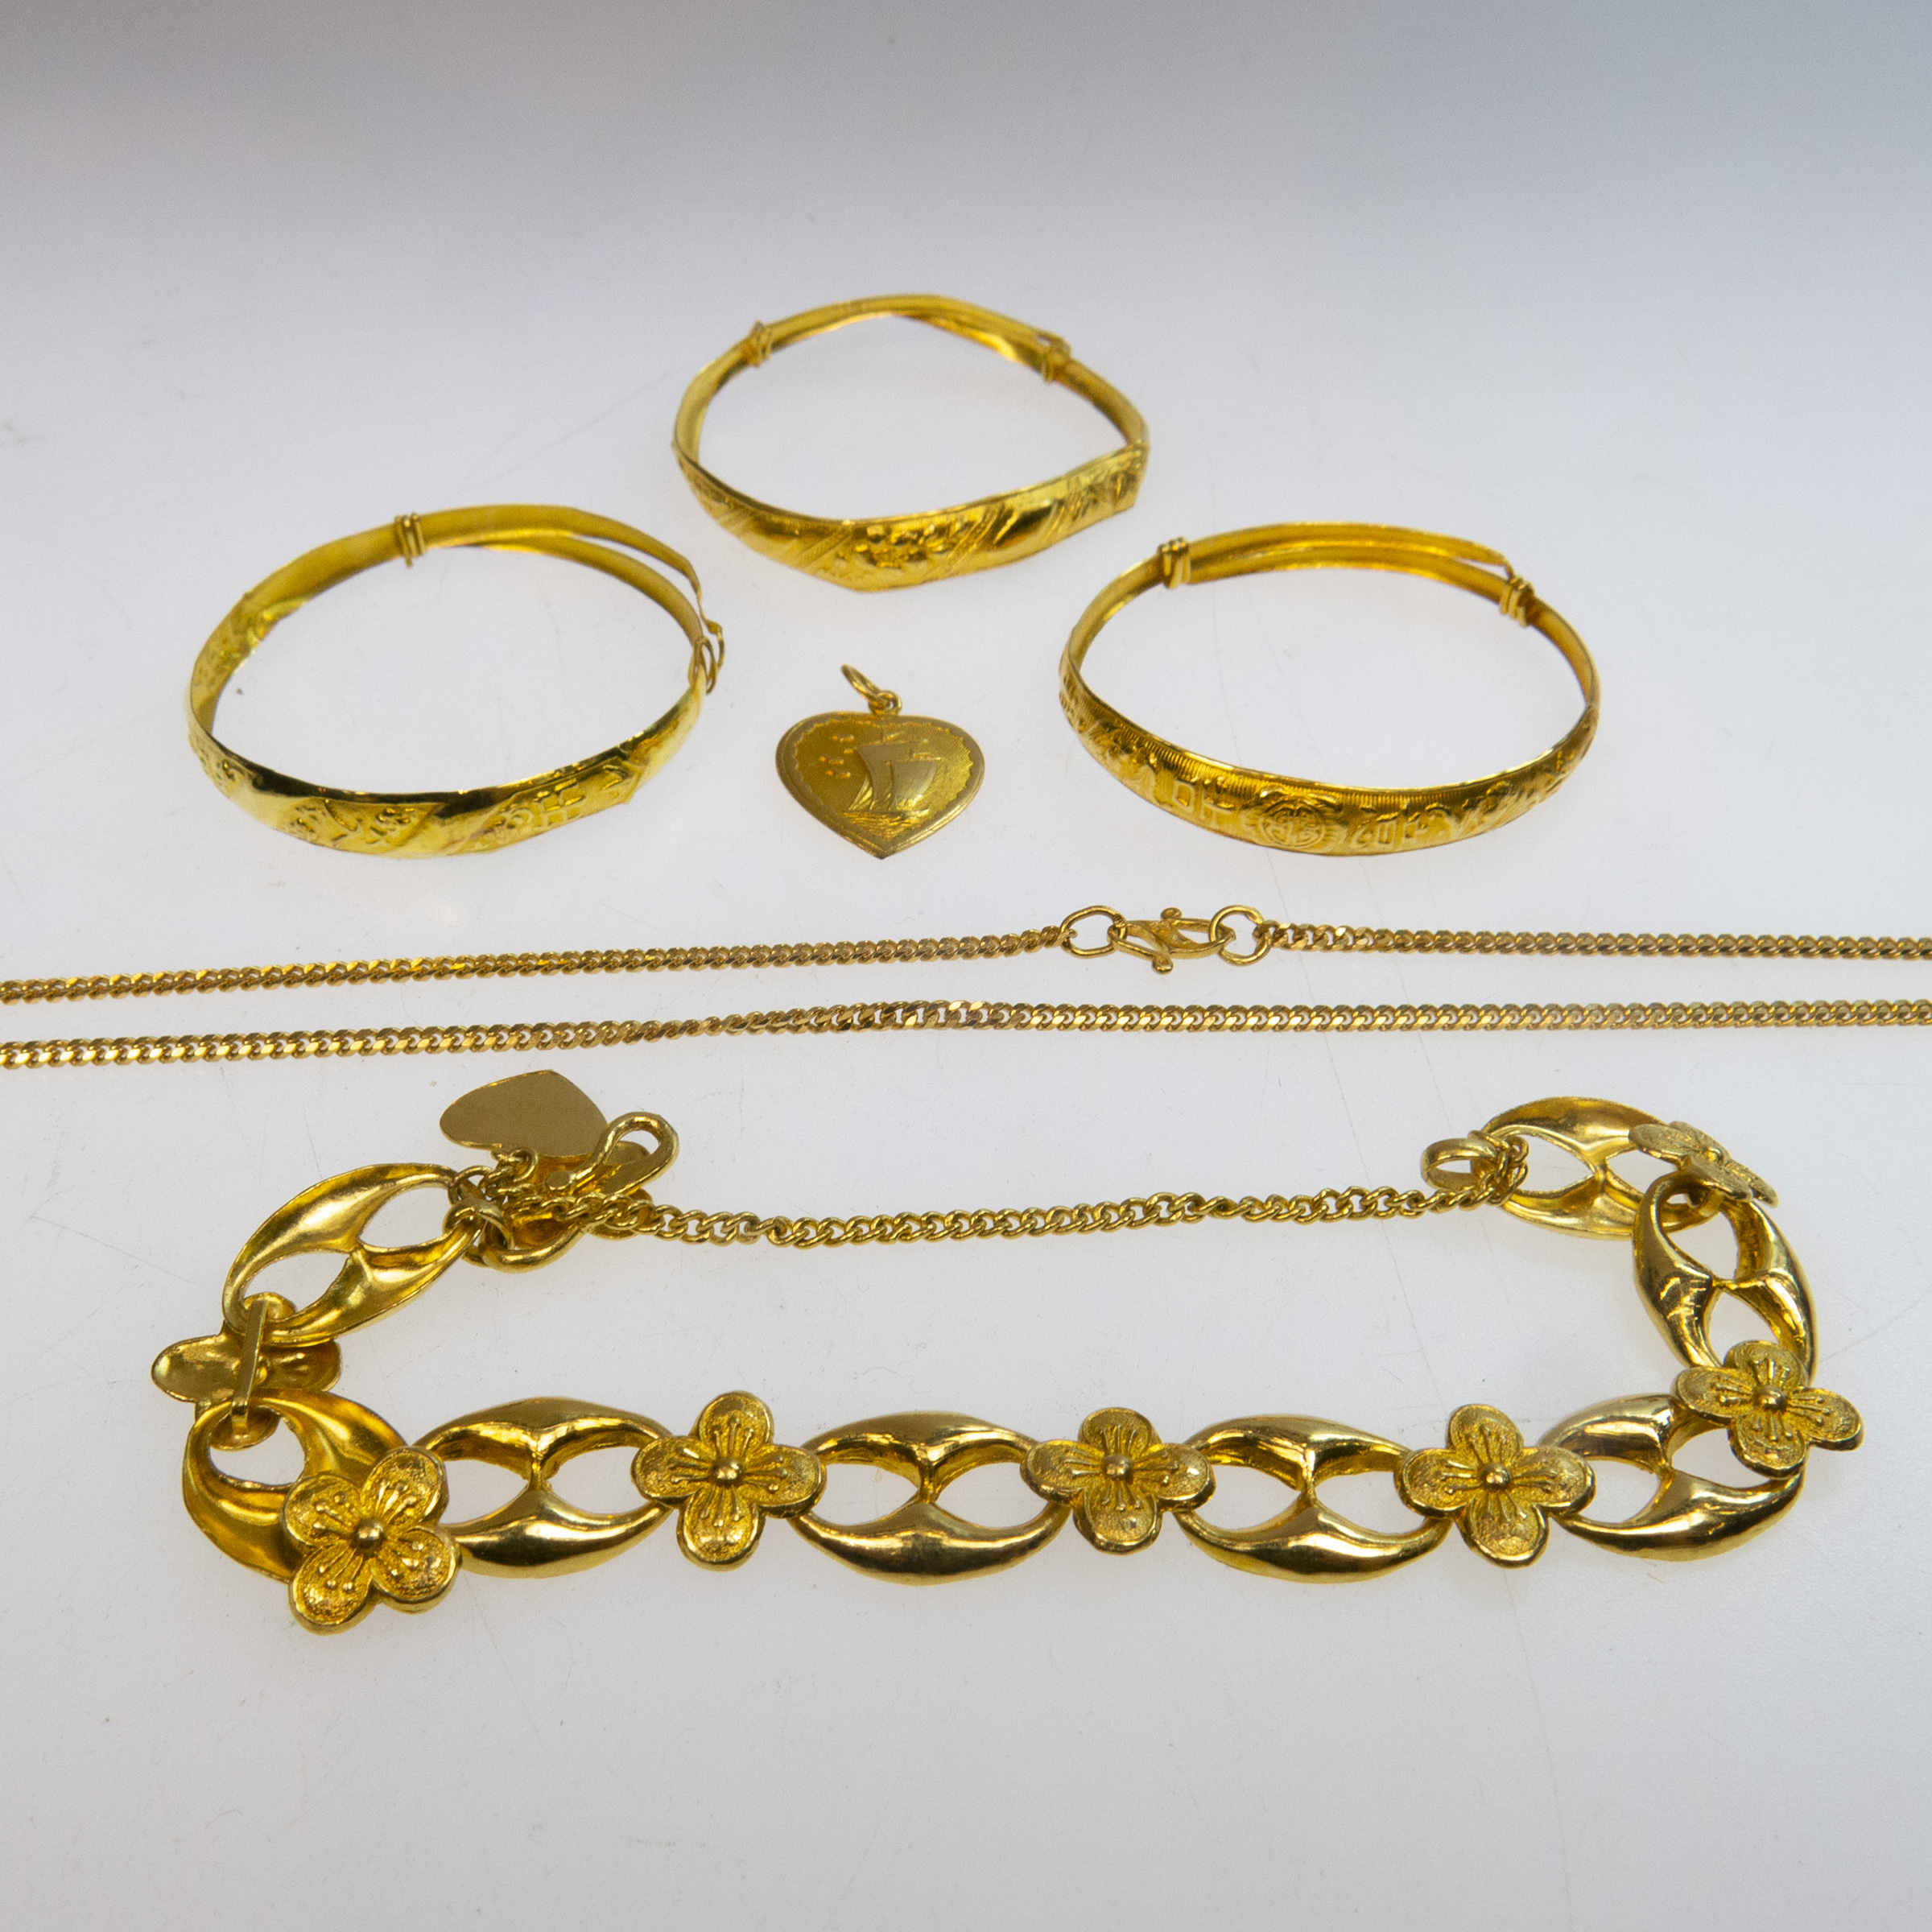 Small Quantity of Chinese High Karat Gold Jewellery